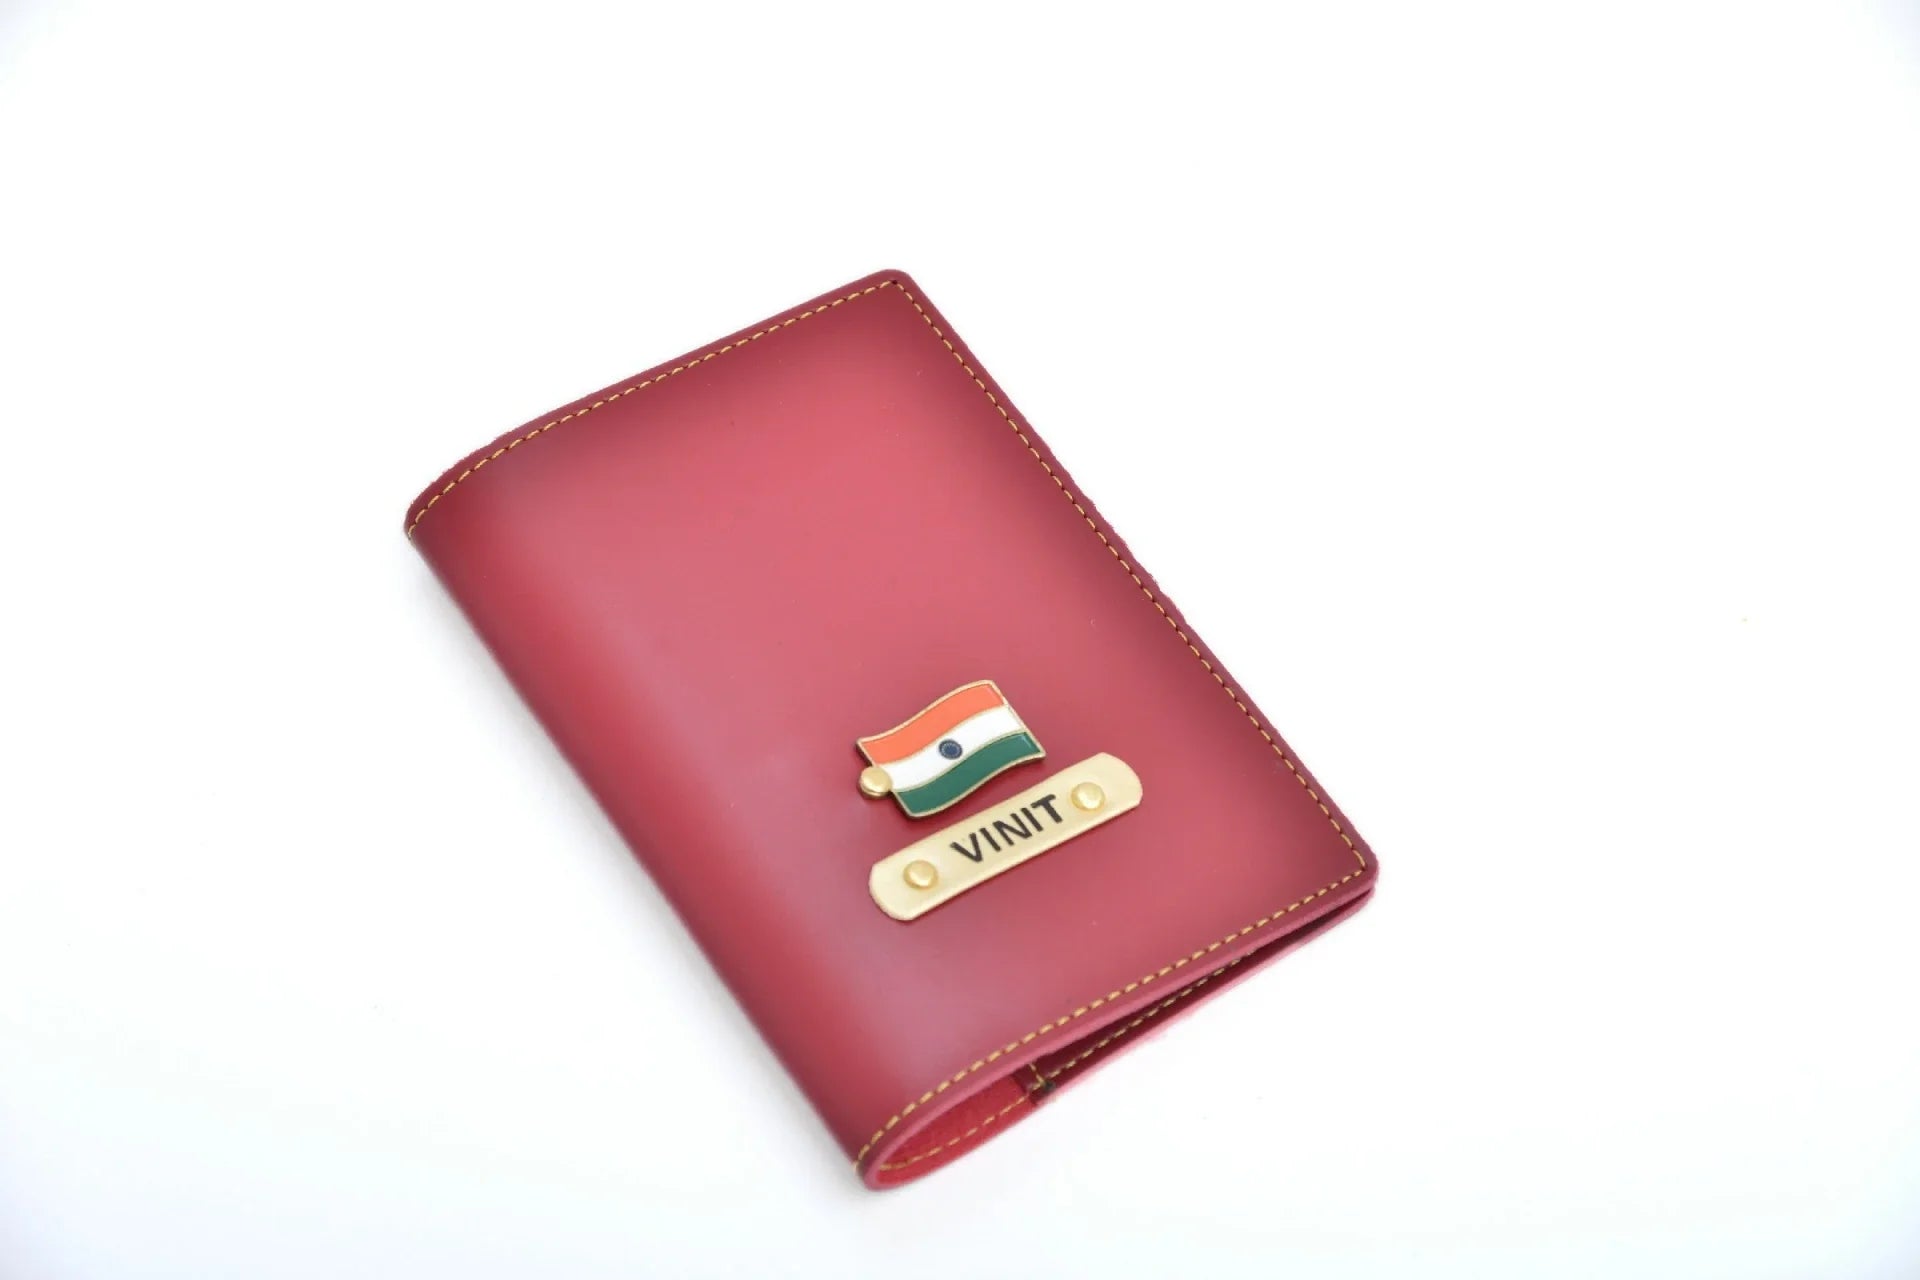 The durable finish of this personalized leather passport case keeps your passport clean, handy and away from any sort of stress and scratches!